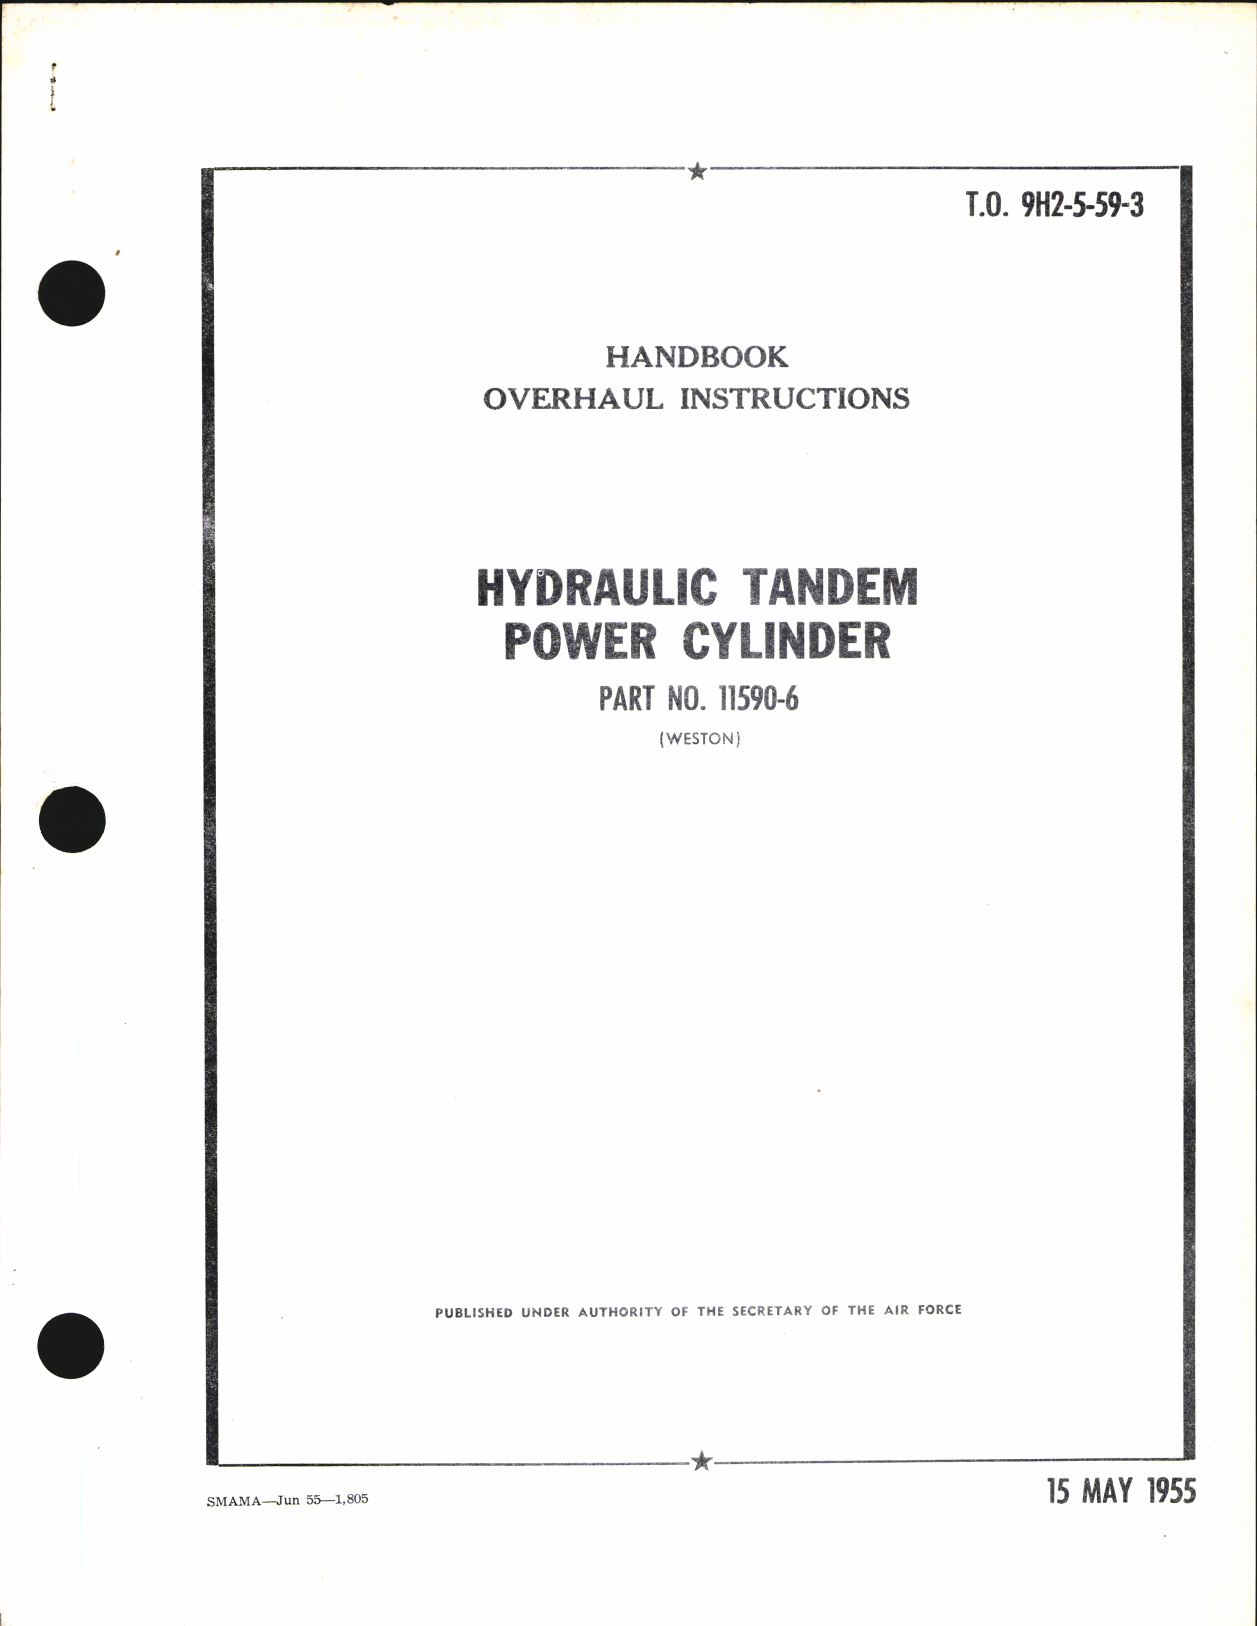 Sample page 1 from AirCorps Library document: Overhaul Instructions for Hydraulic Tandem power cylinder Part No. 11590-6